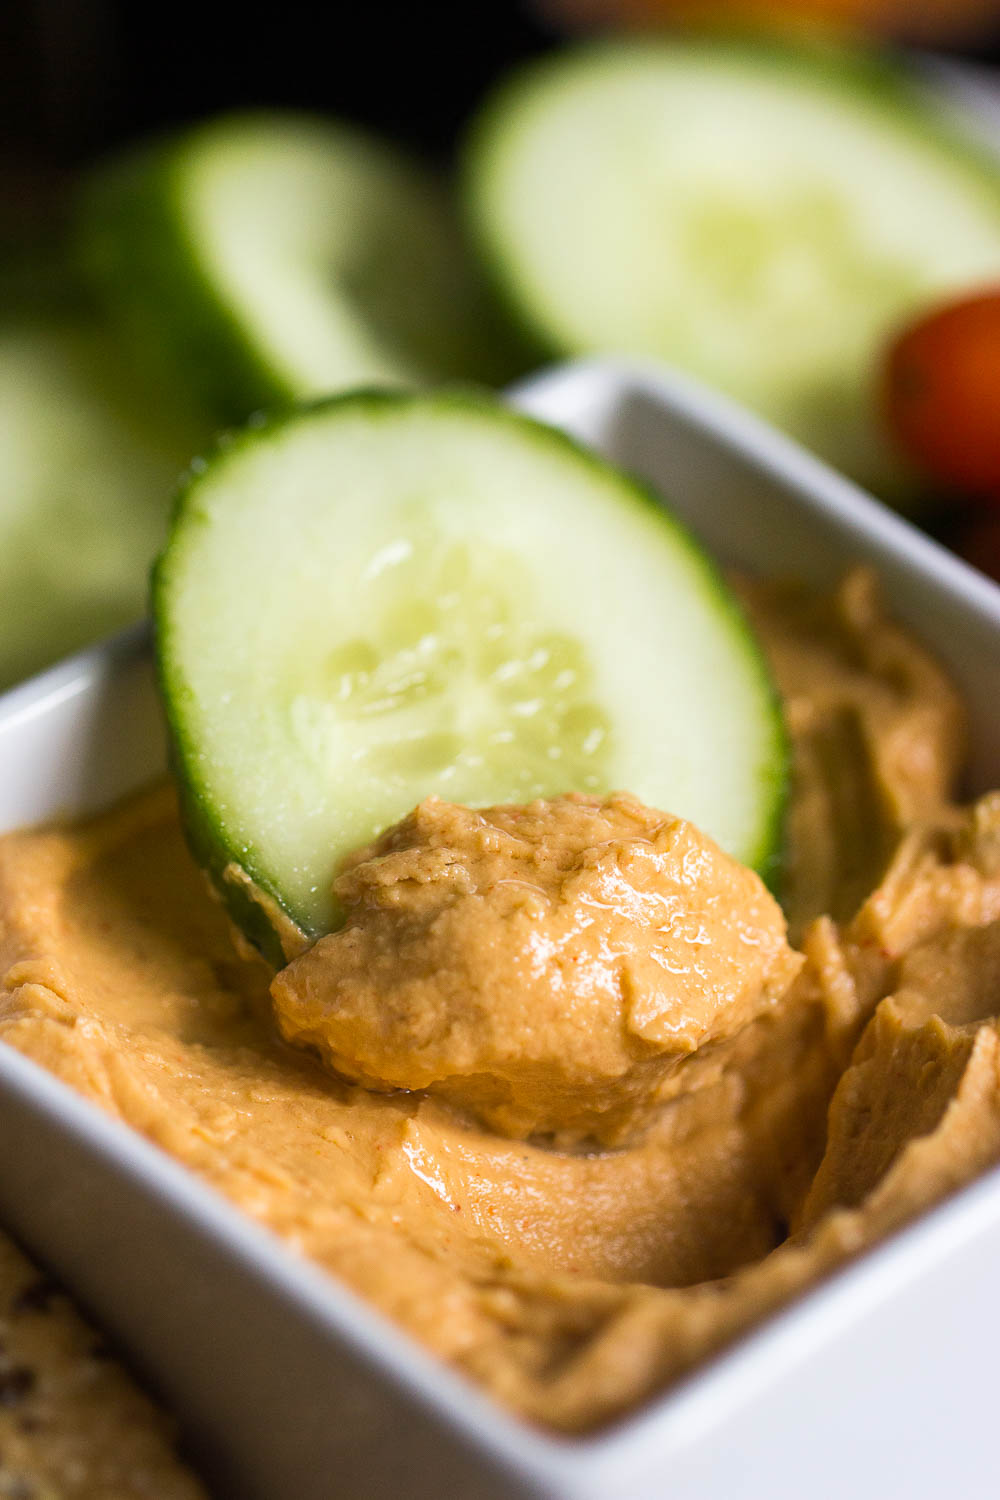 This Thai Curry Hummus will leave you craving the flavor for days after trying it!